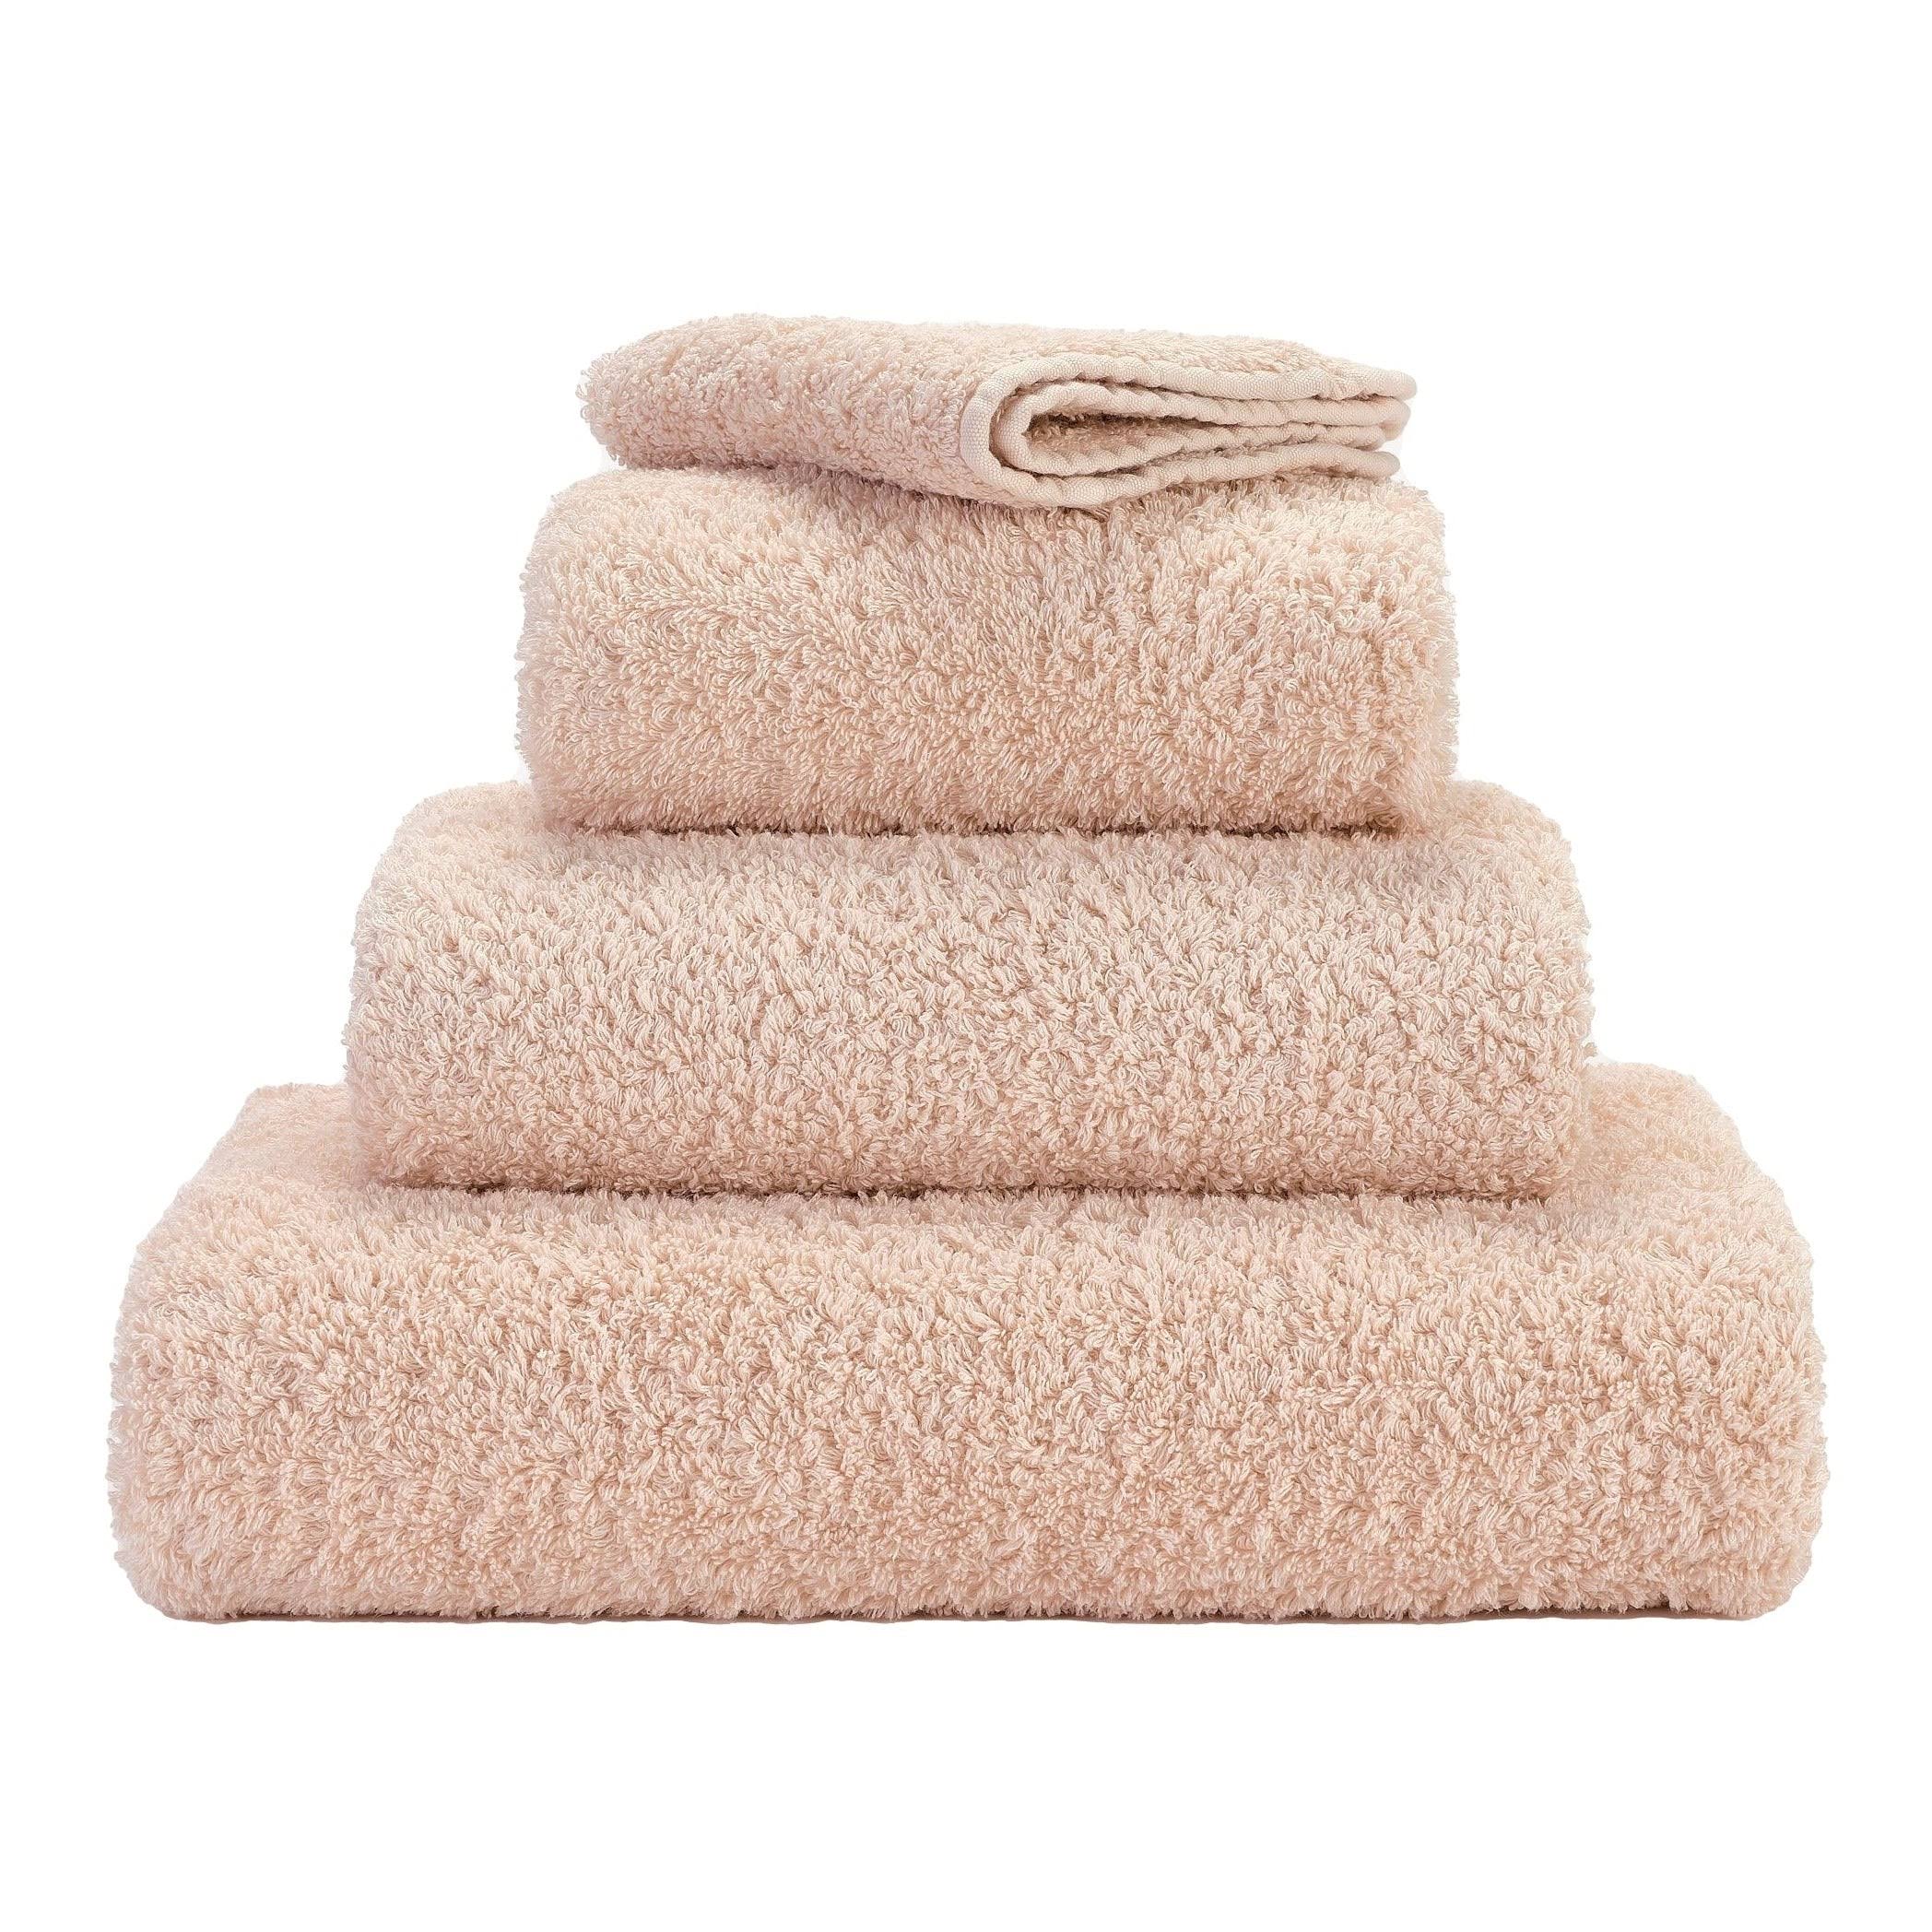 Abyss Super Pile Towels - Hand Towel 17x30" Nude 610